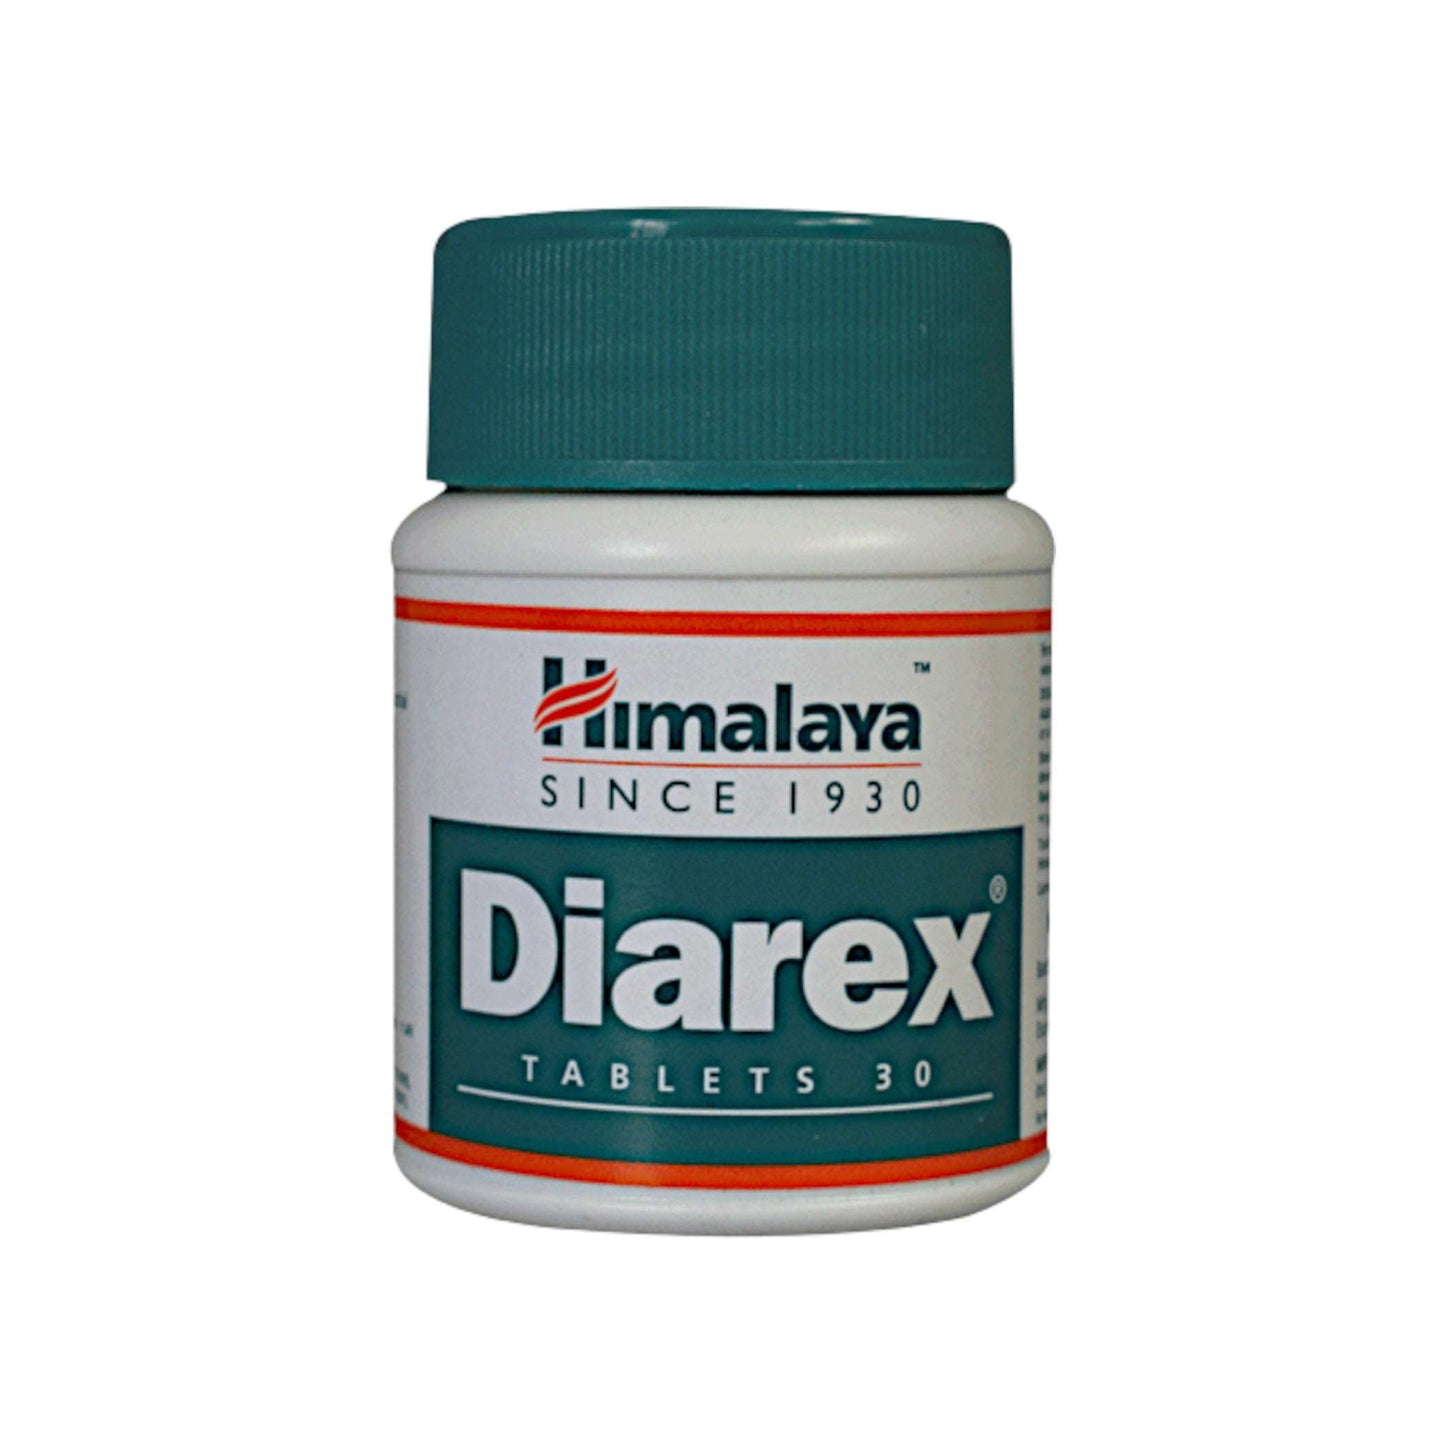 Image: Himalaya Herbals - Diarex 30 Tablets: Manages diarrhea, dysentery, and amoebic infections.